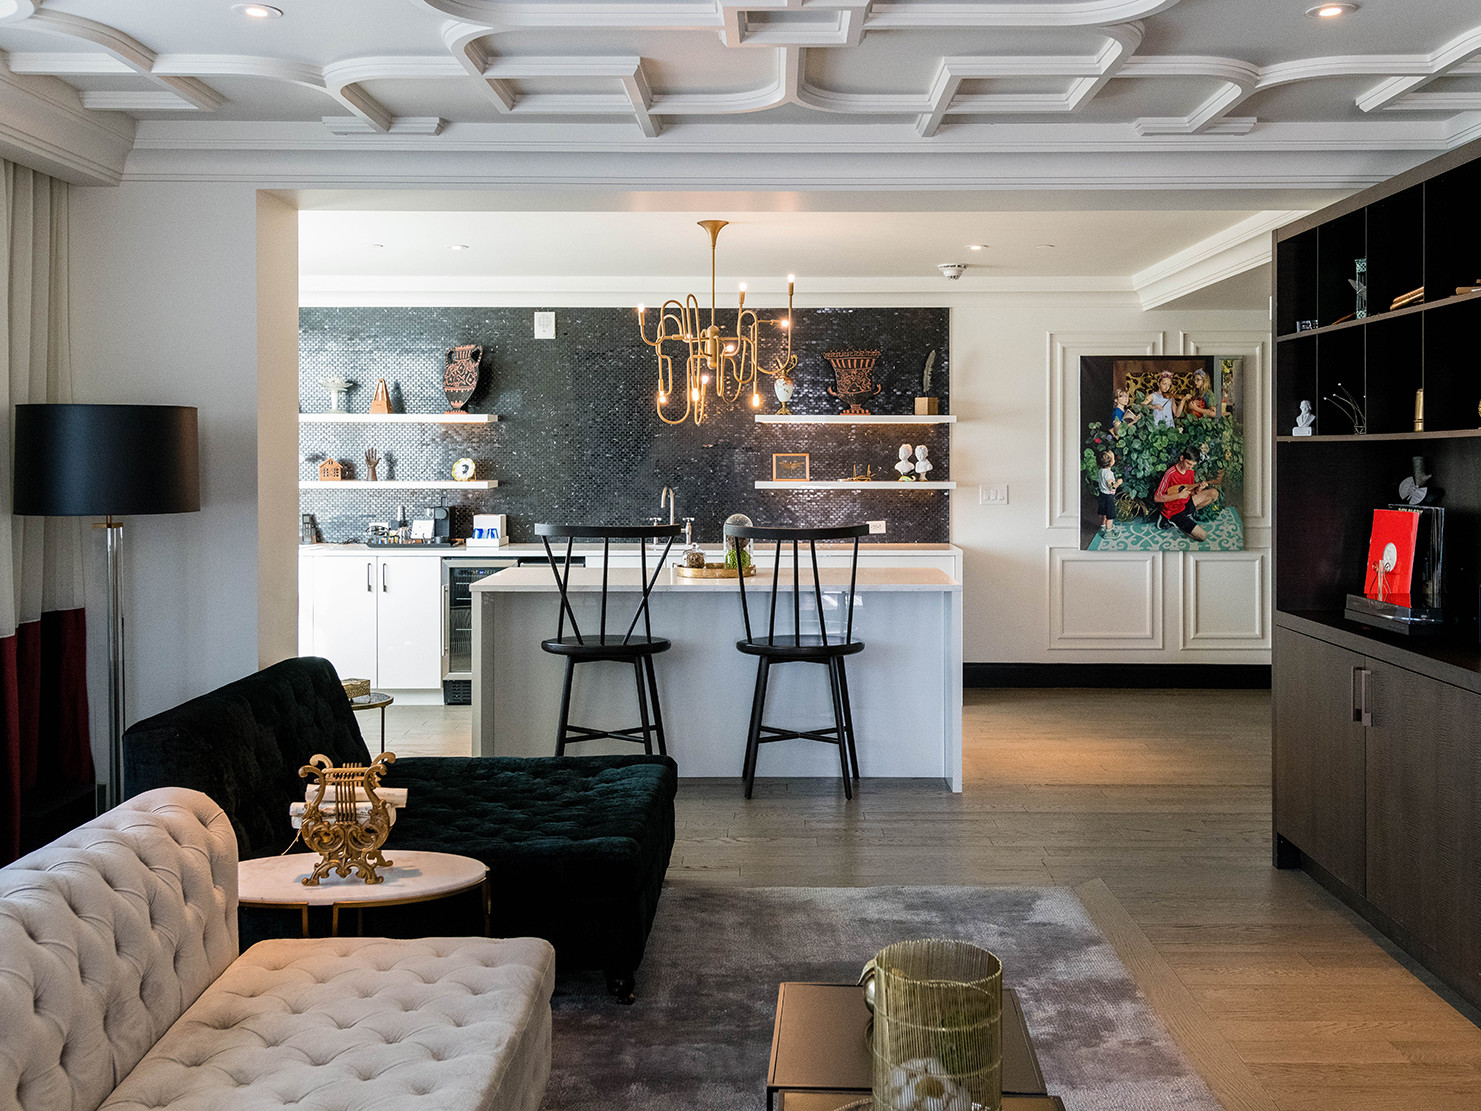 white molding walls and ceiling and oak wood floors with tufted velvet couches. a marble kitchen island with two black stools